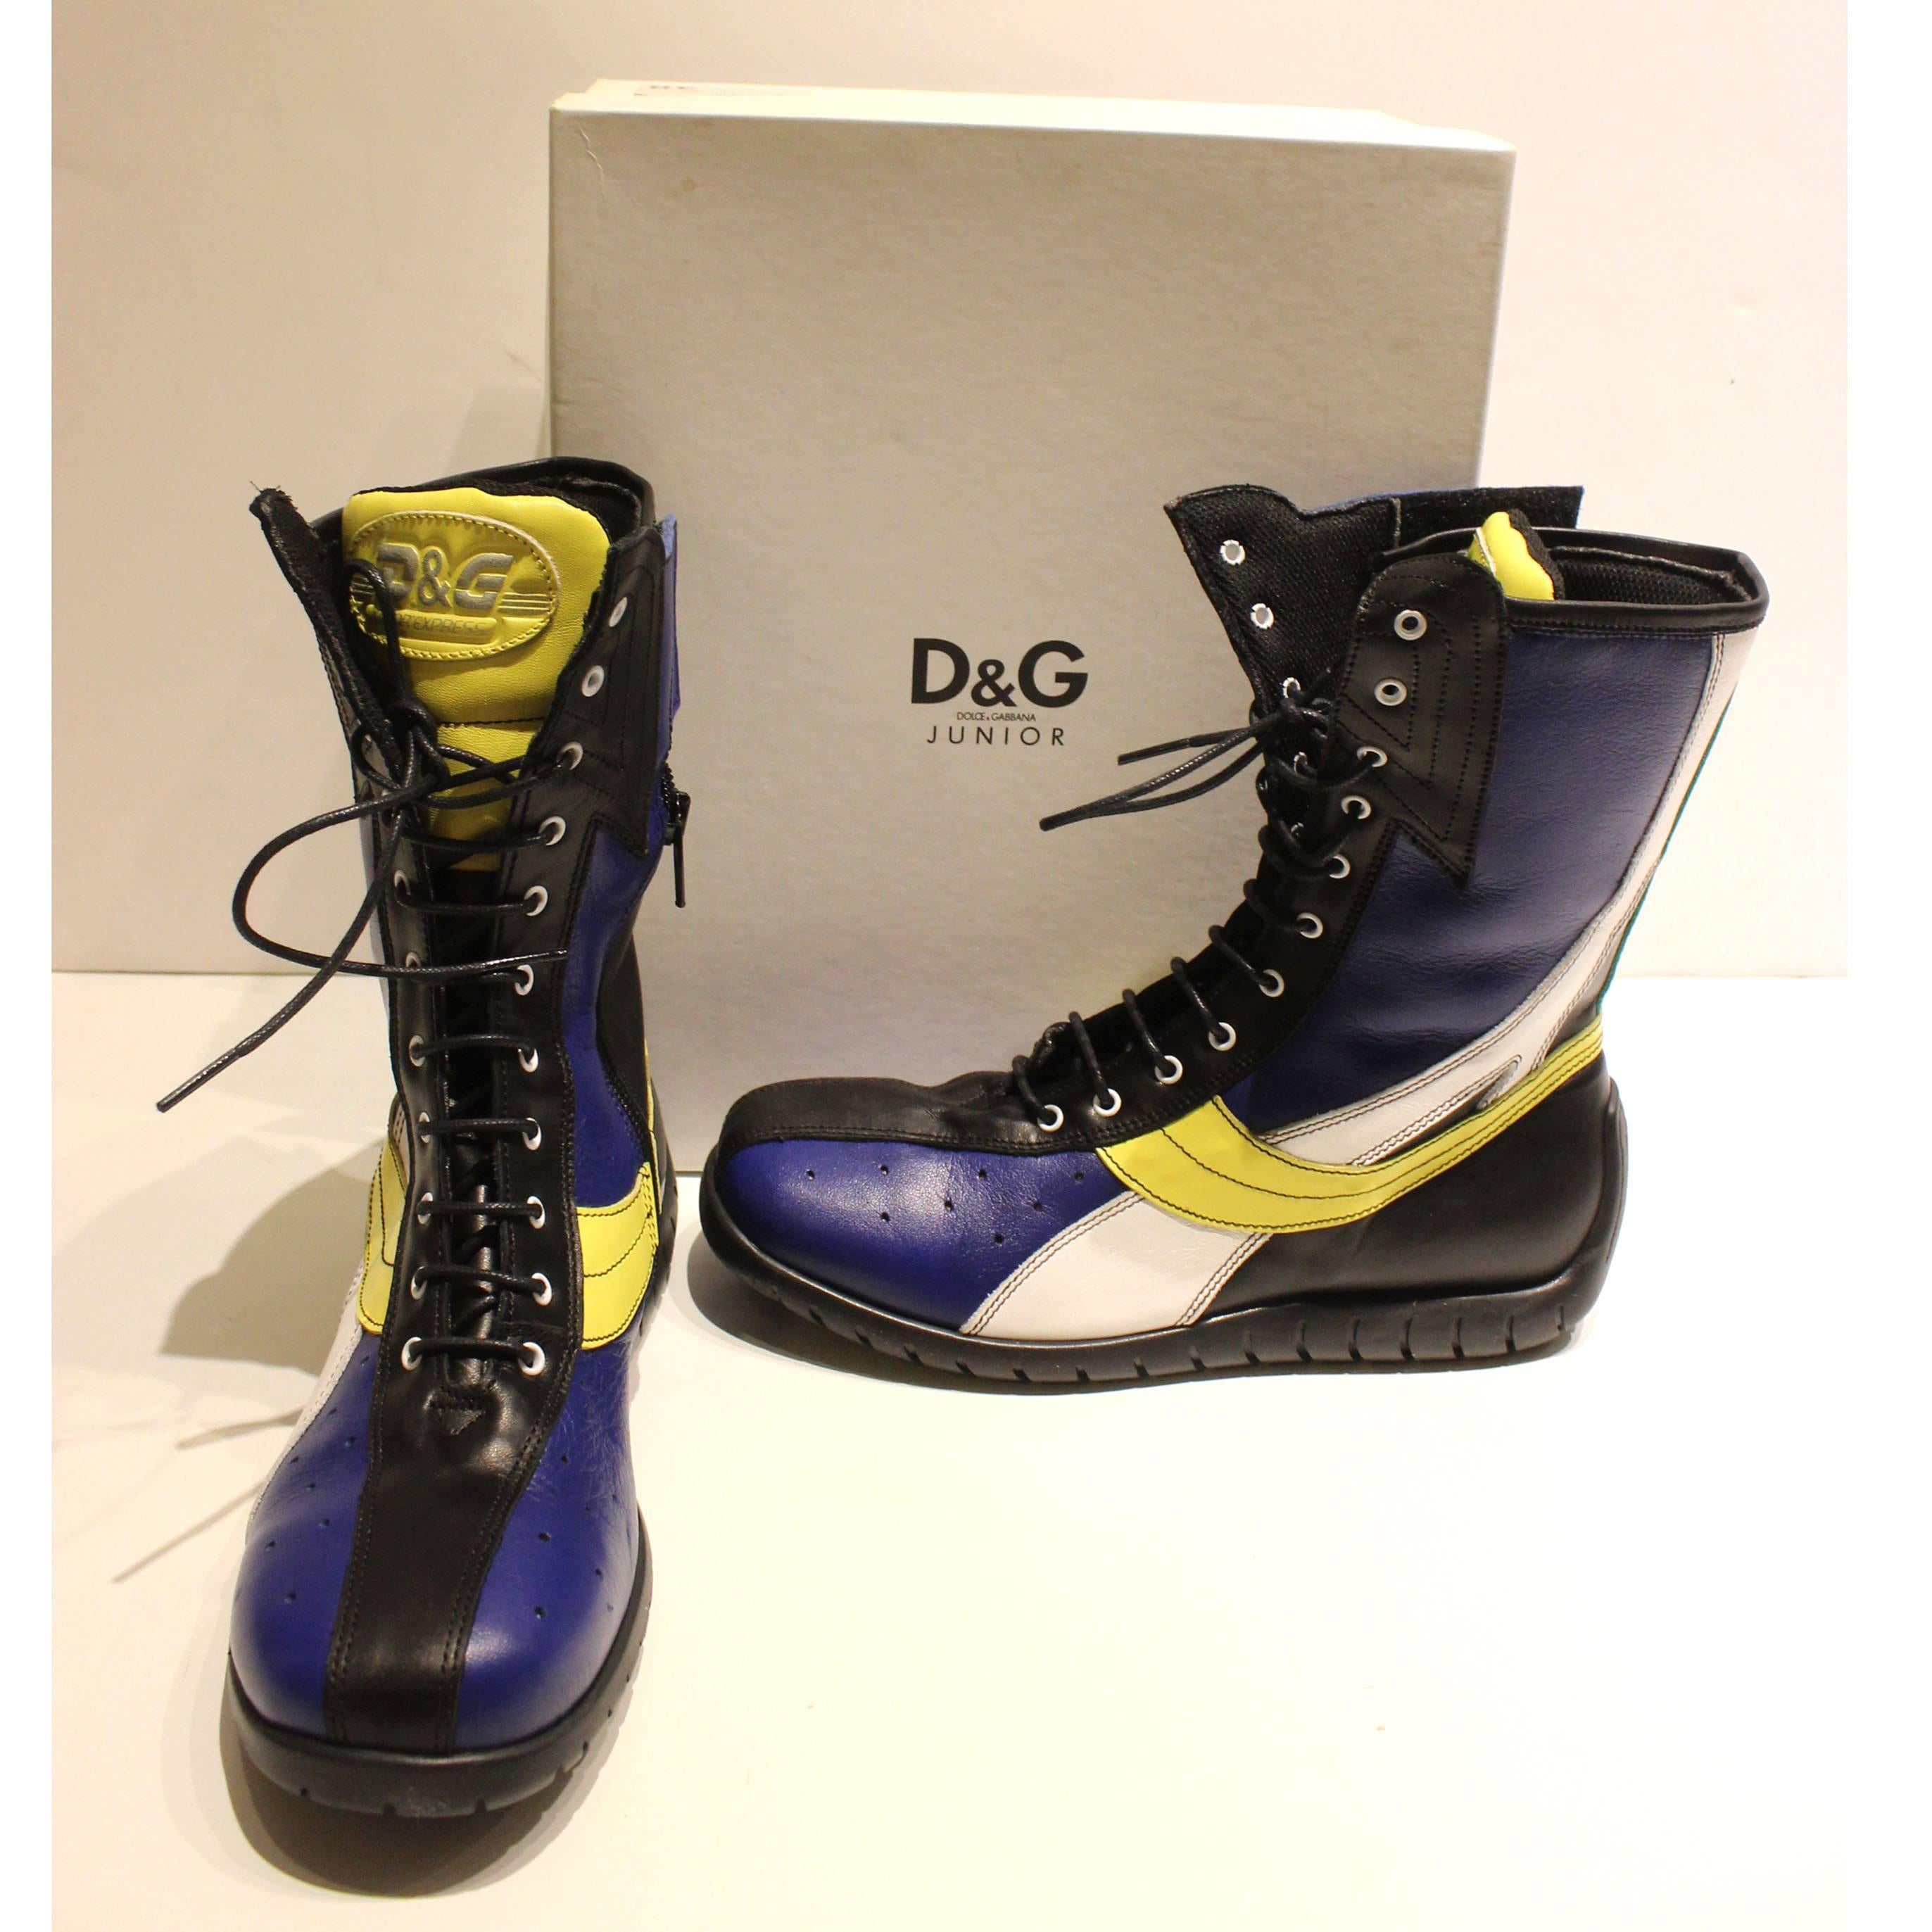 These brightly colored wrestling boots were produced by Dolce and Gabbana in 1990 and became all the rage. They were part of the D & G Junior line when they made a 